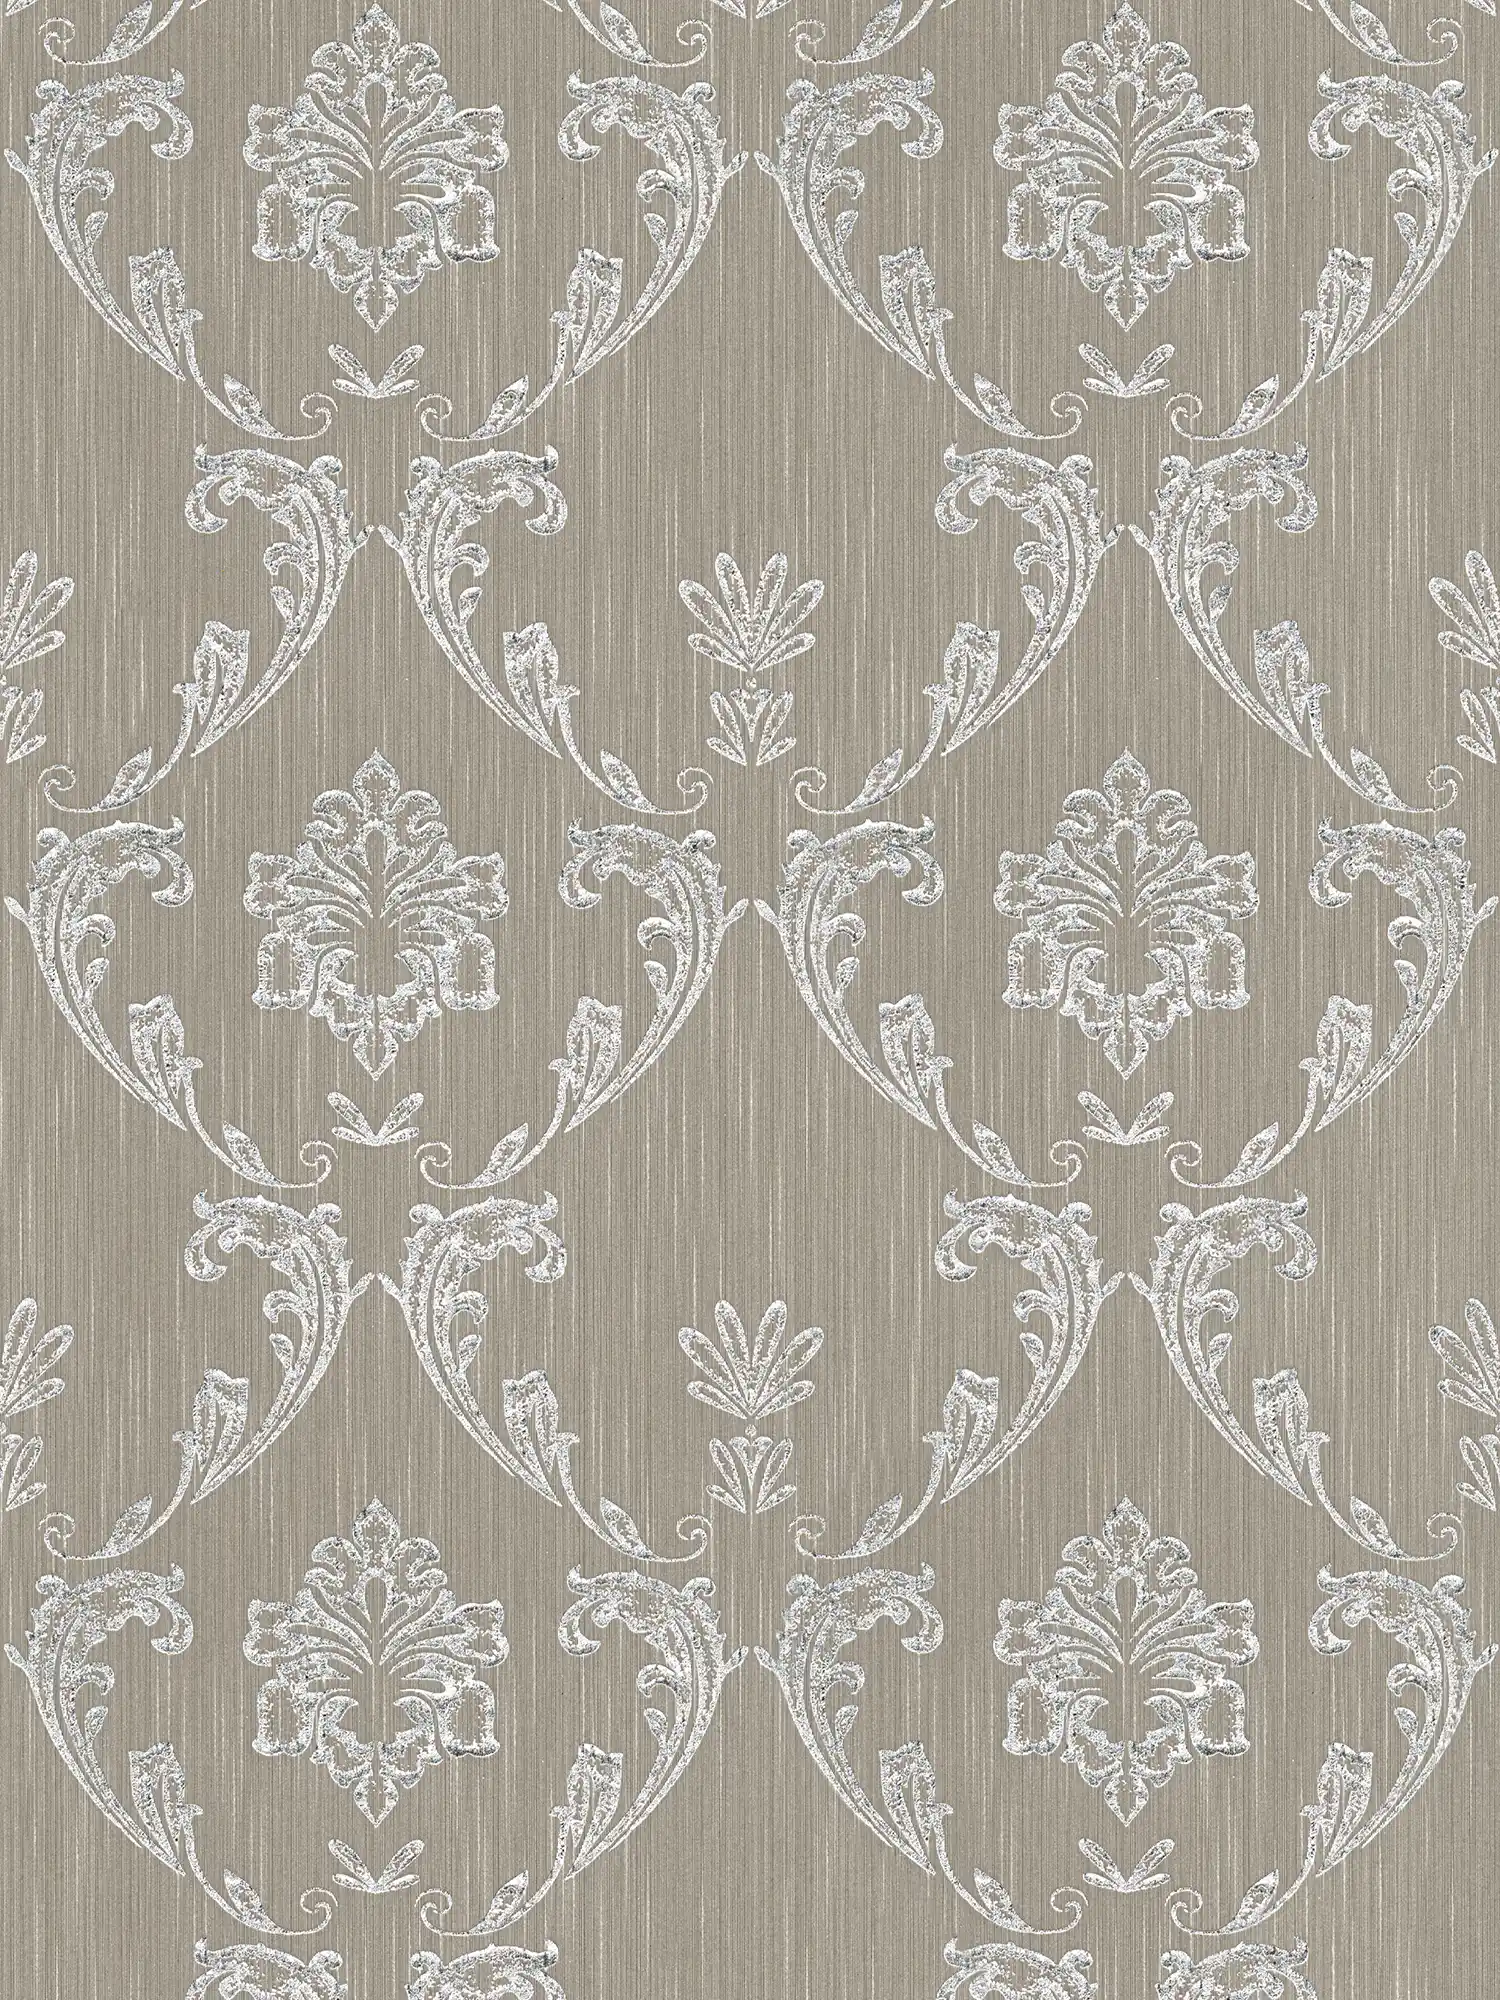 Ornamental wallpaper with floral elements in silver - silver, brown
